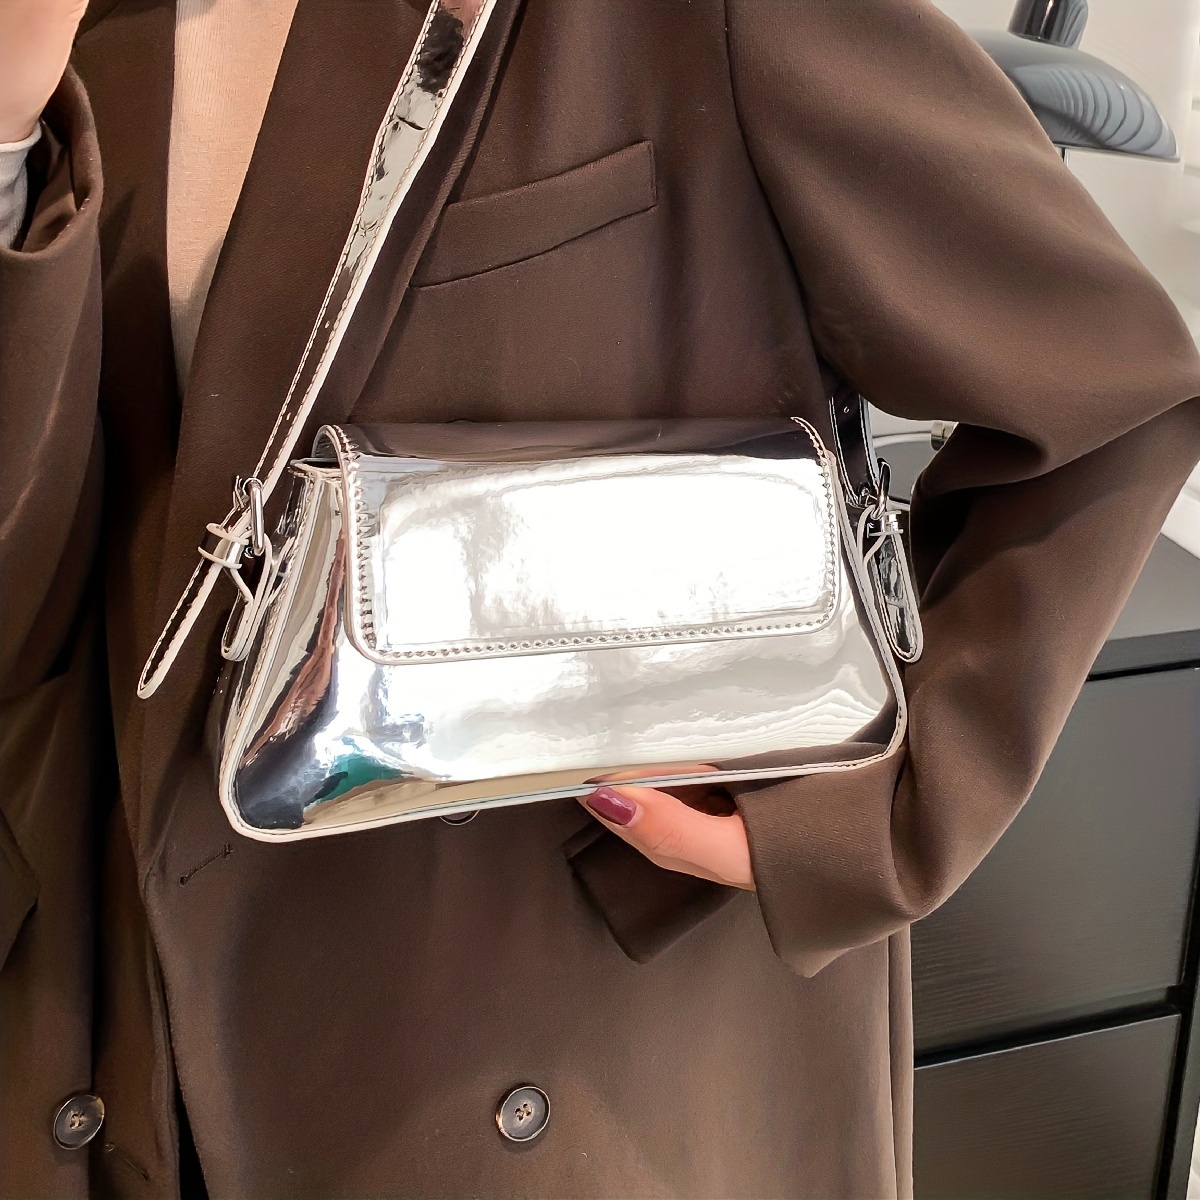 How To Style Silver Metallic Bags